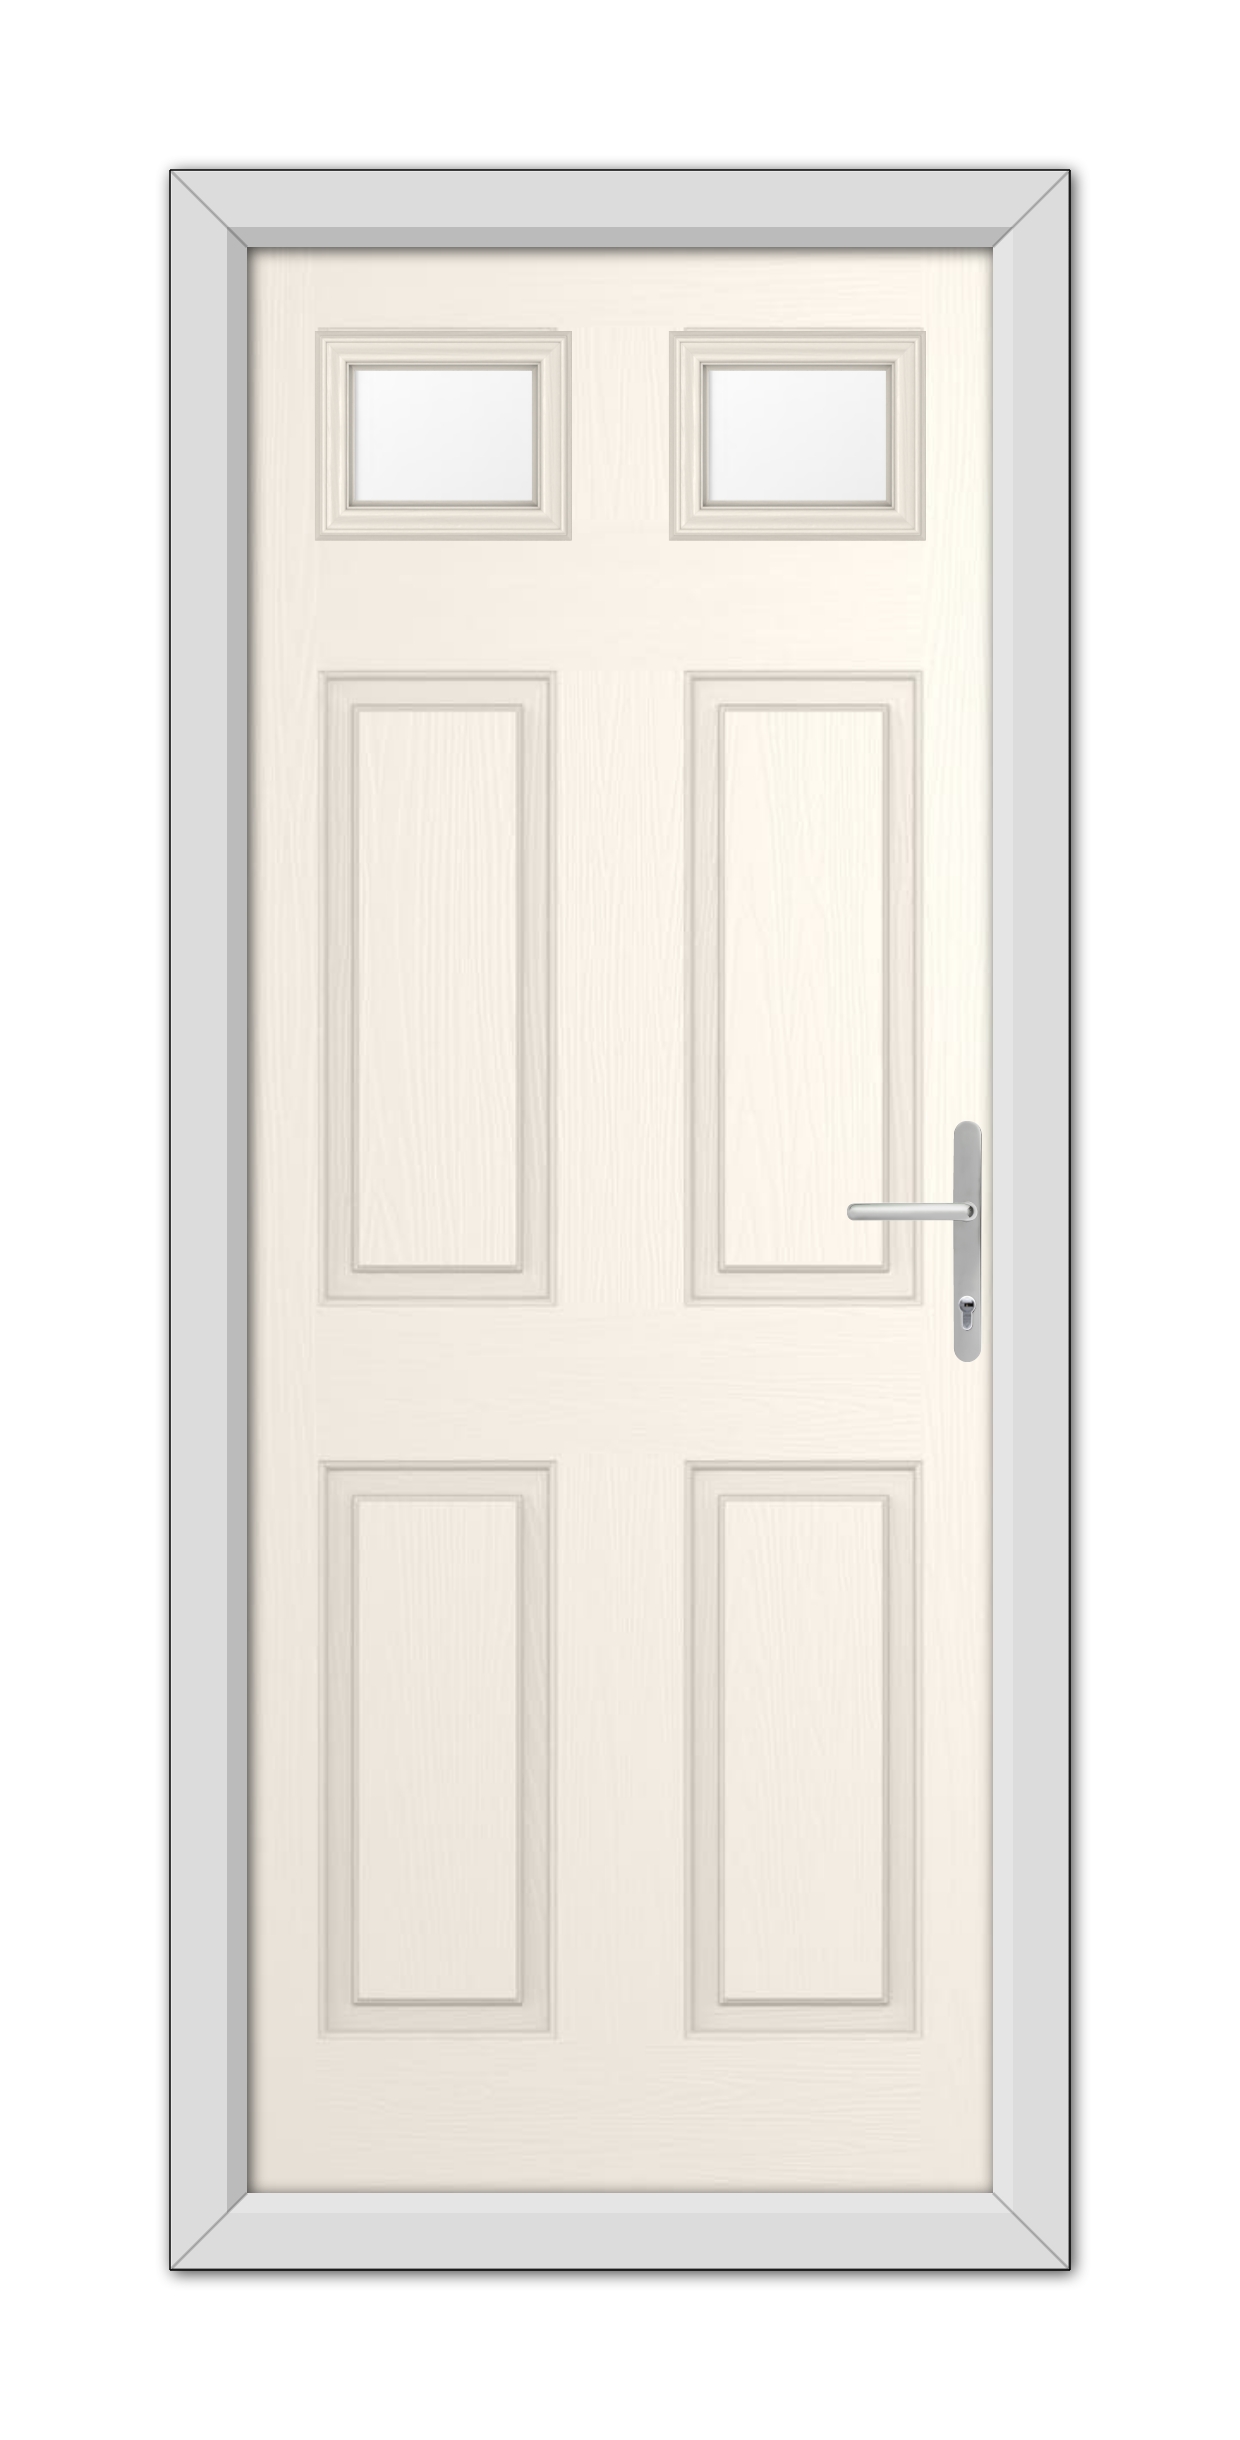 A modern White Foil Middleton Glazed 2 Composite Door 48mm Timber Core with six panels and a metallic handle, set within a gray door frame.